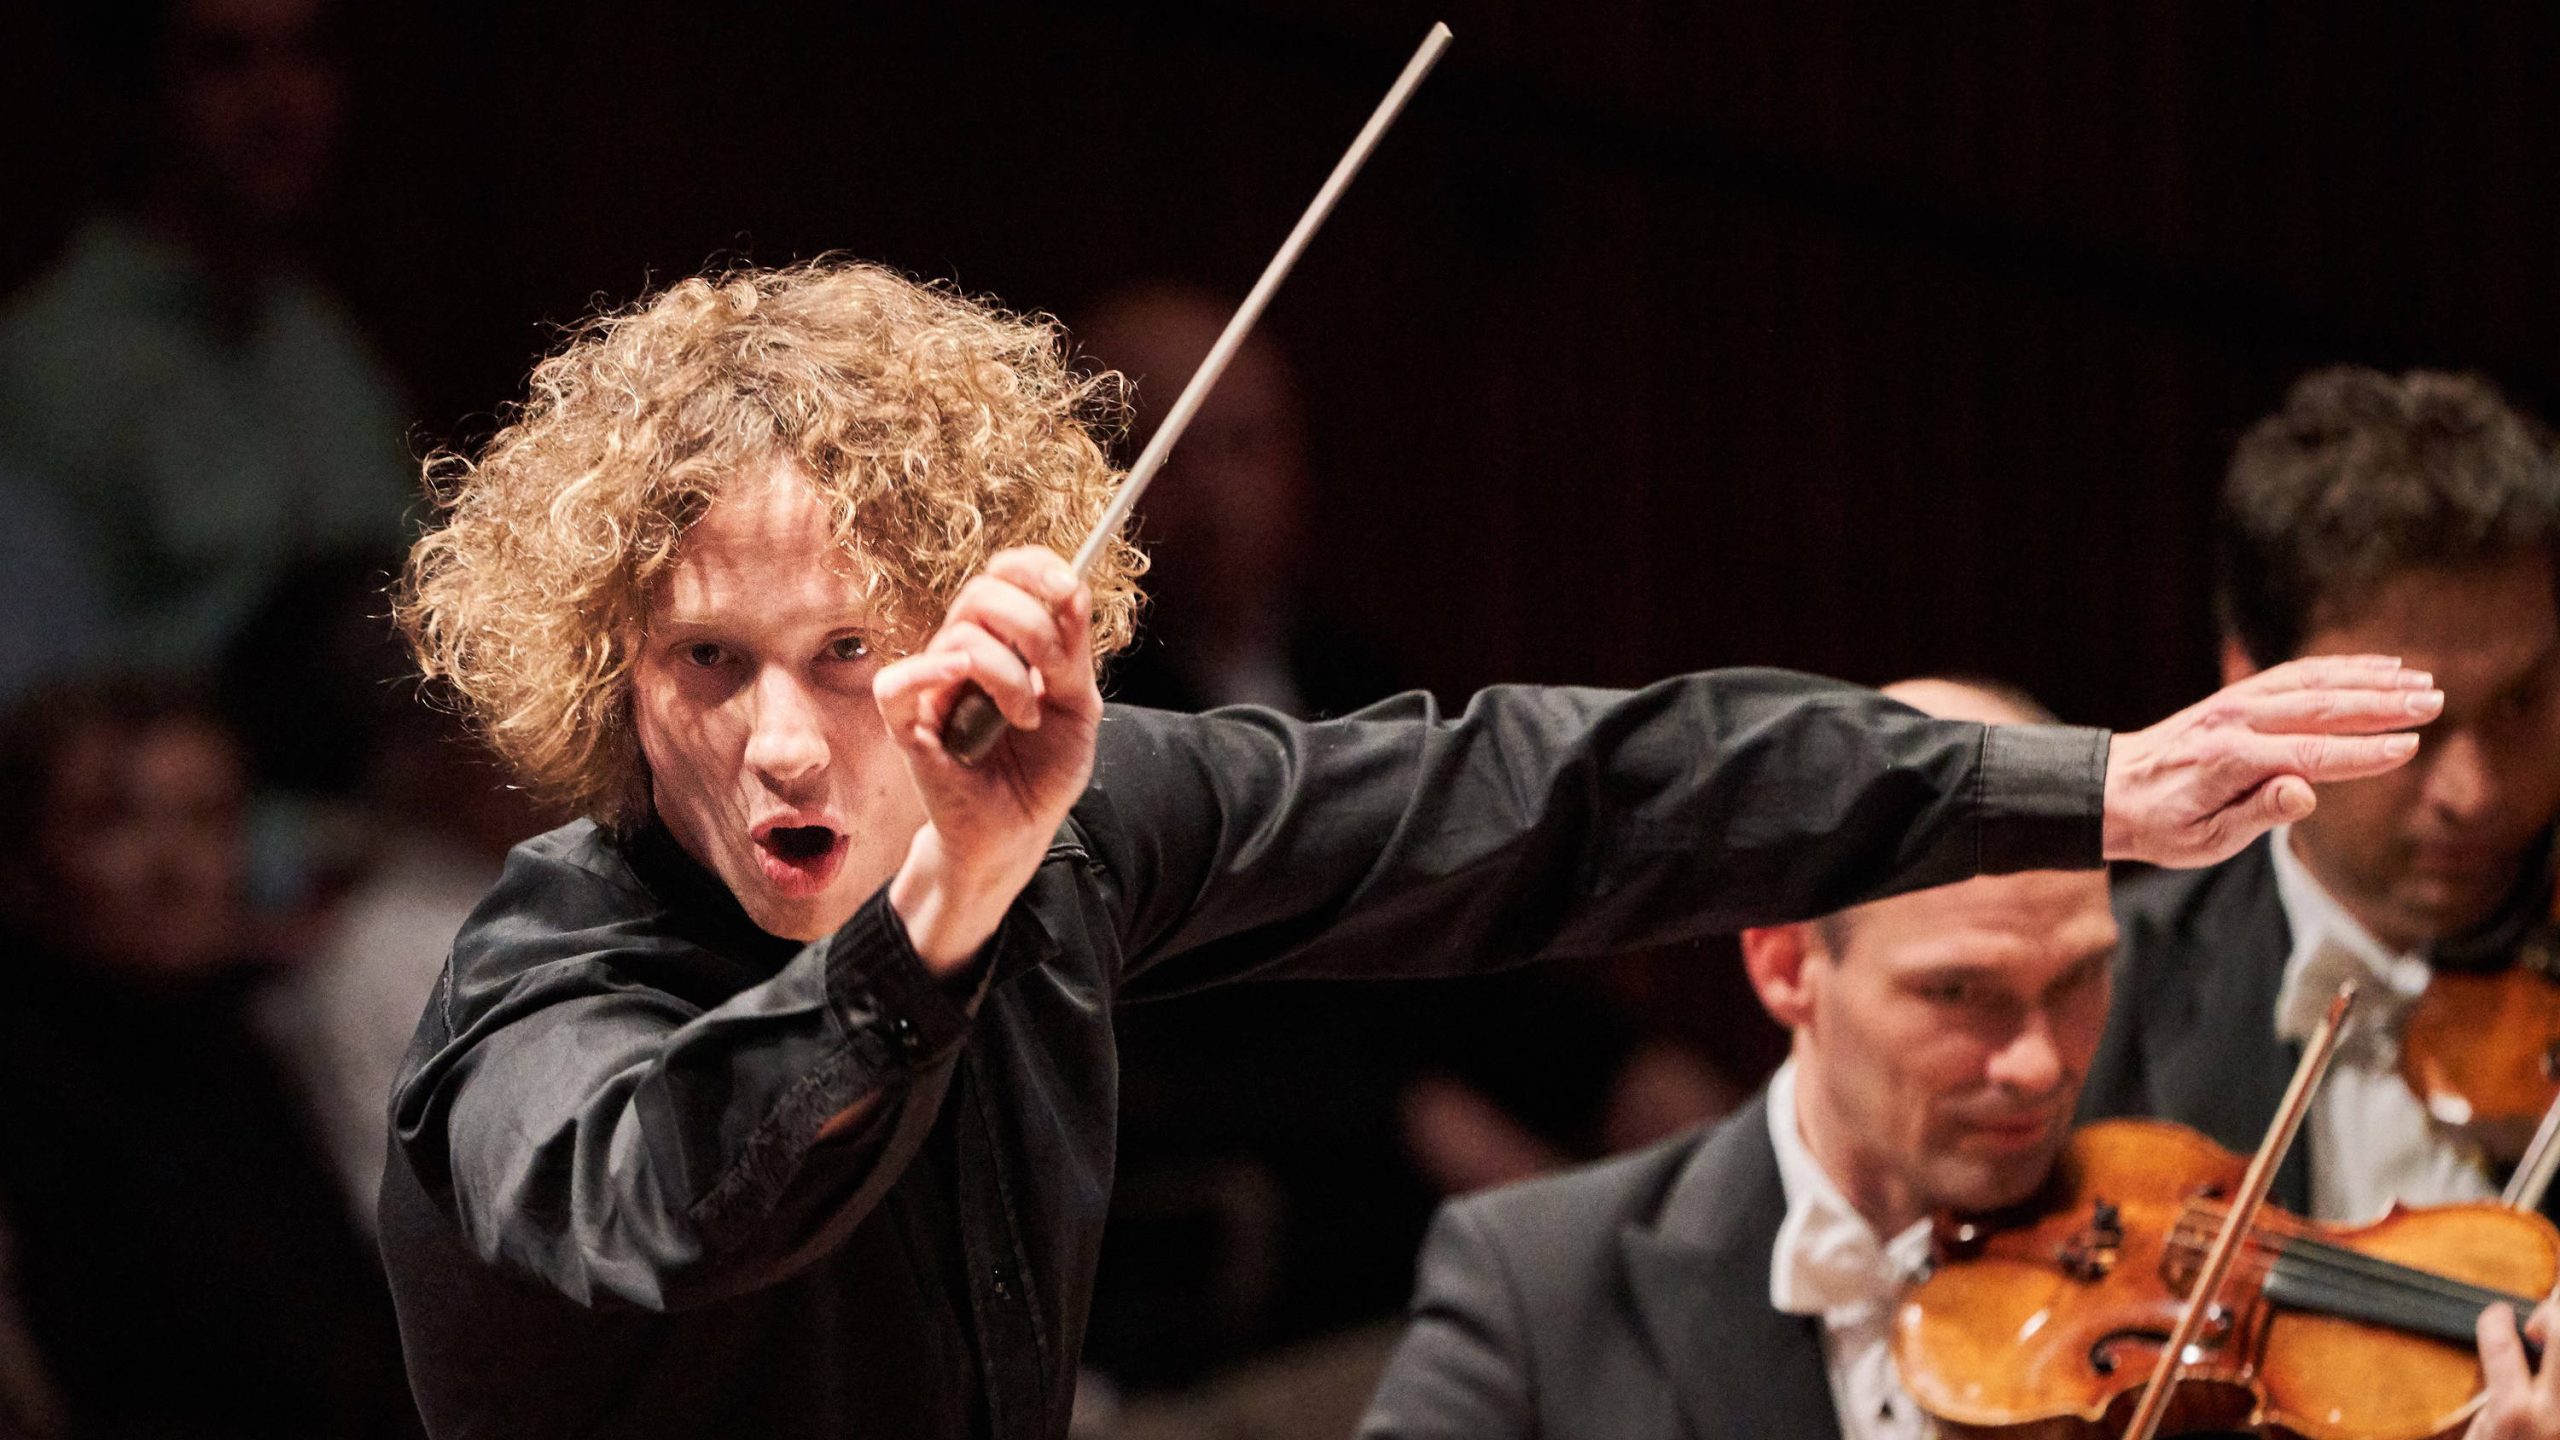 Conductor with long hair, mouth open